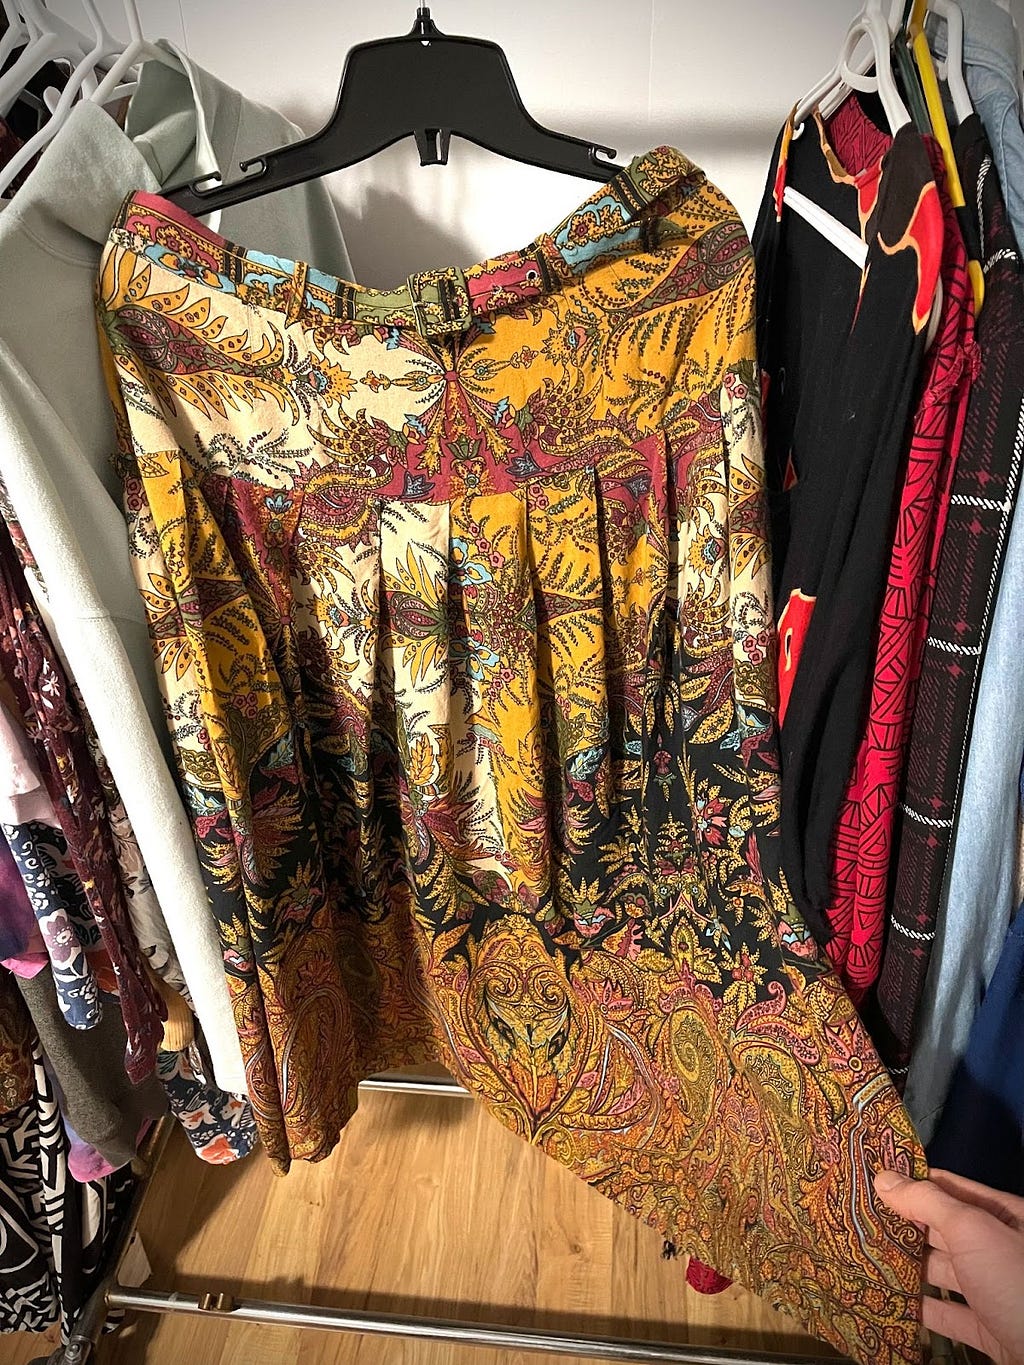 Long, thin skirt on clothing rack. Paisley patterns with orange, red, blue, cream, and black colours.